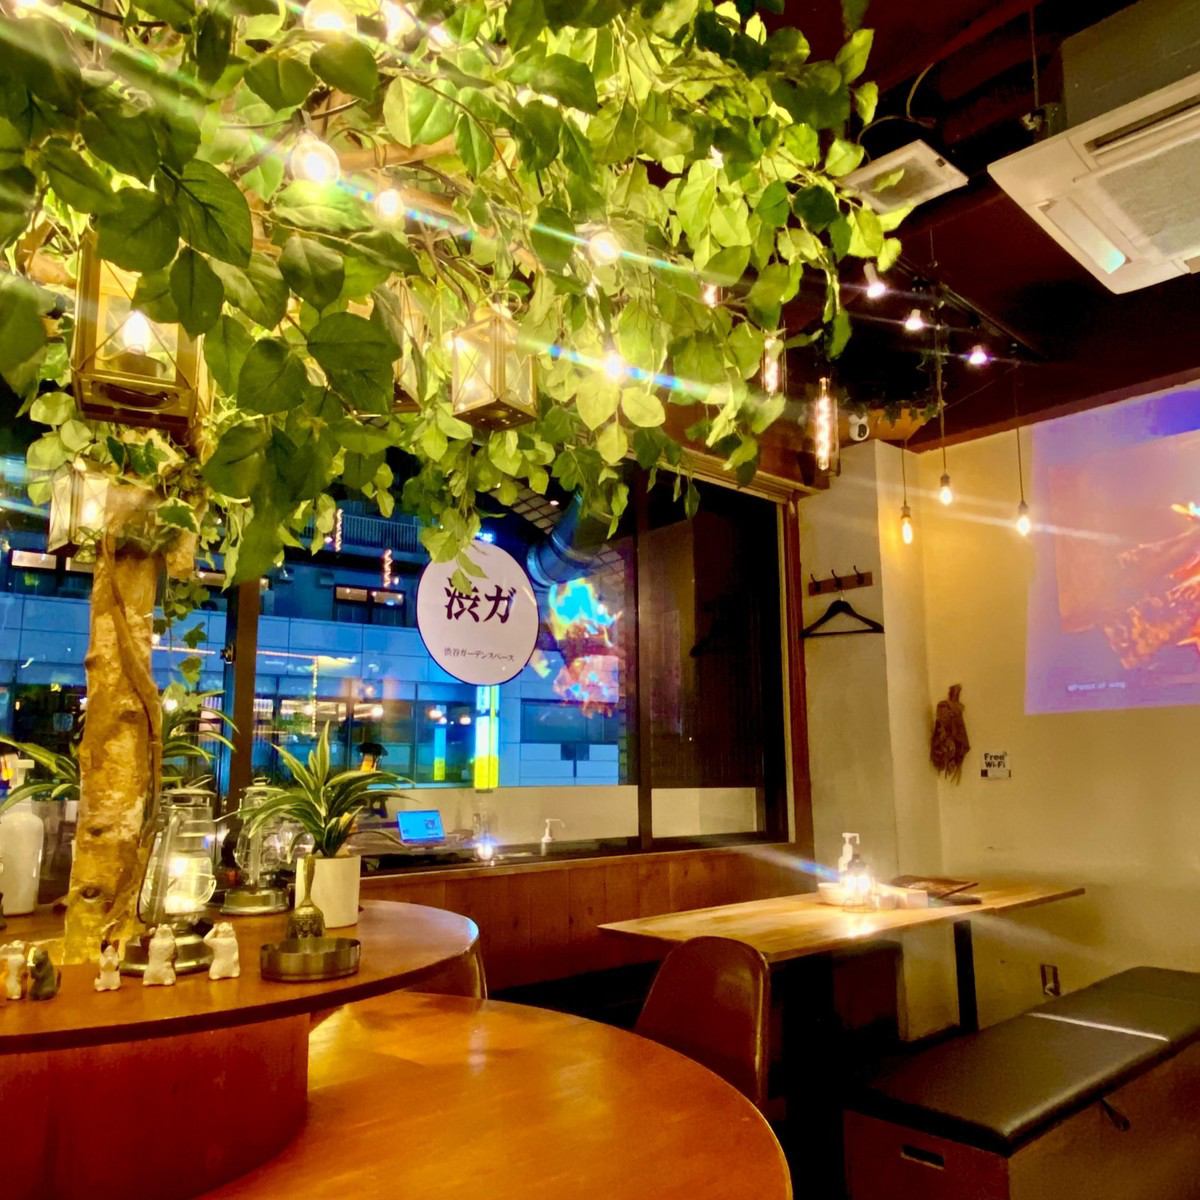 A private party near Shibuya Station! Children are also welcome! Large windows provide perfect ventilation! We accept reservations for large groups and private BBQs!